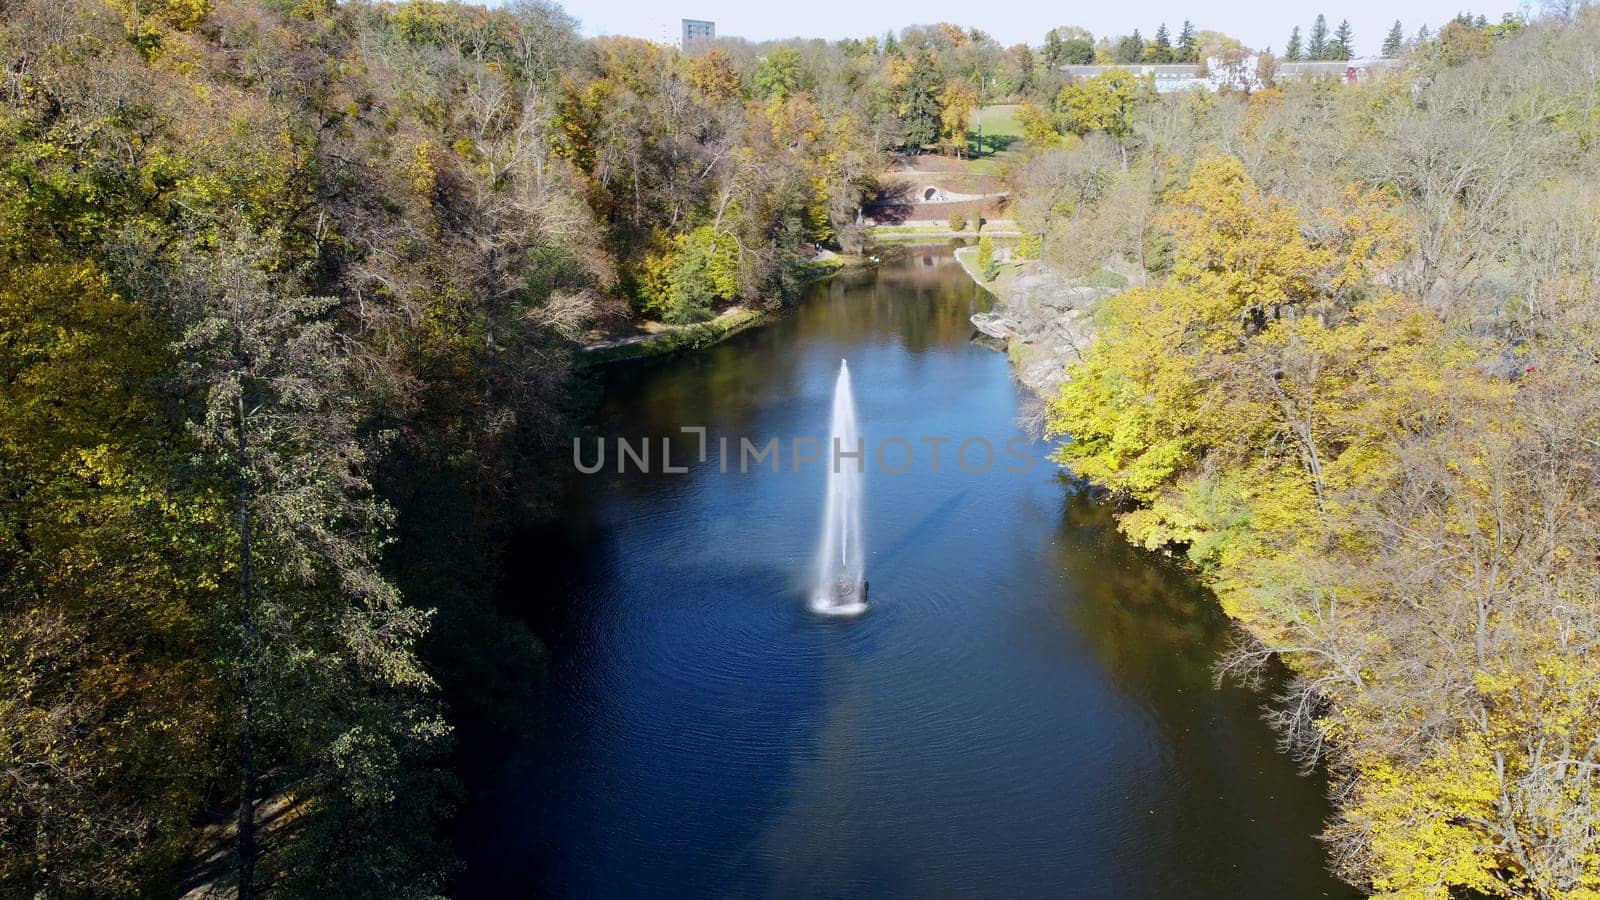 Fountain with rainbow in middle of lake between trees with yellow leaves in park on sunny autumn day. Decorative fountain in center of lake. Natural park arboretum in autumn. Natural landscape. Aerial